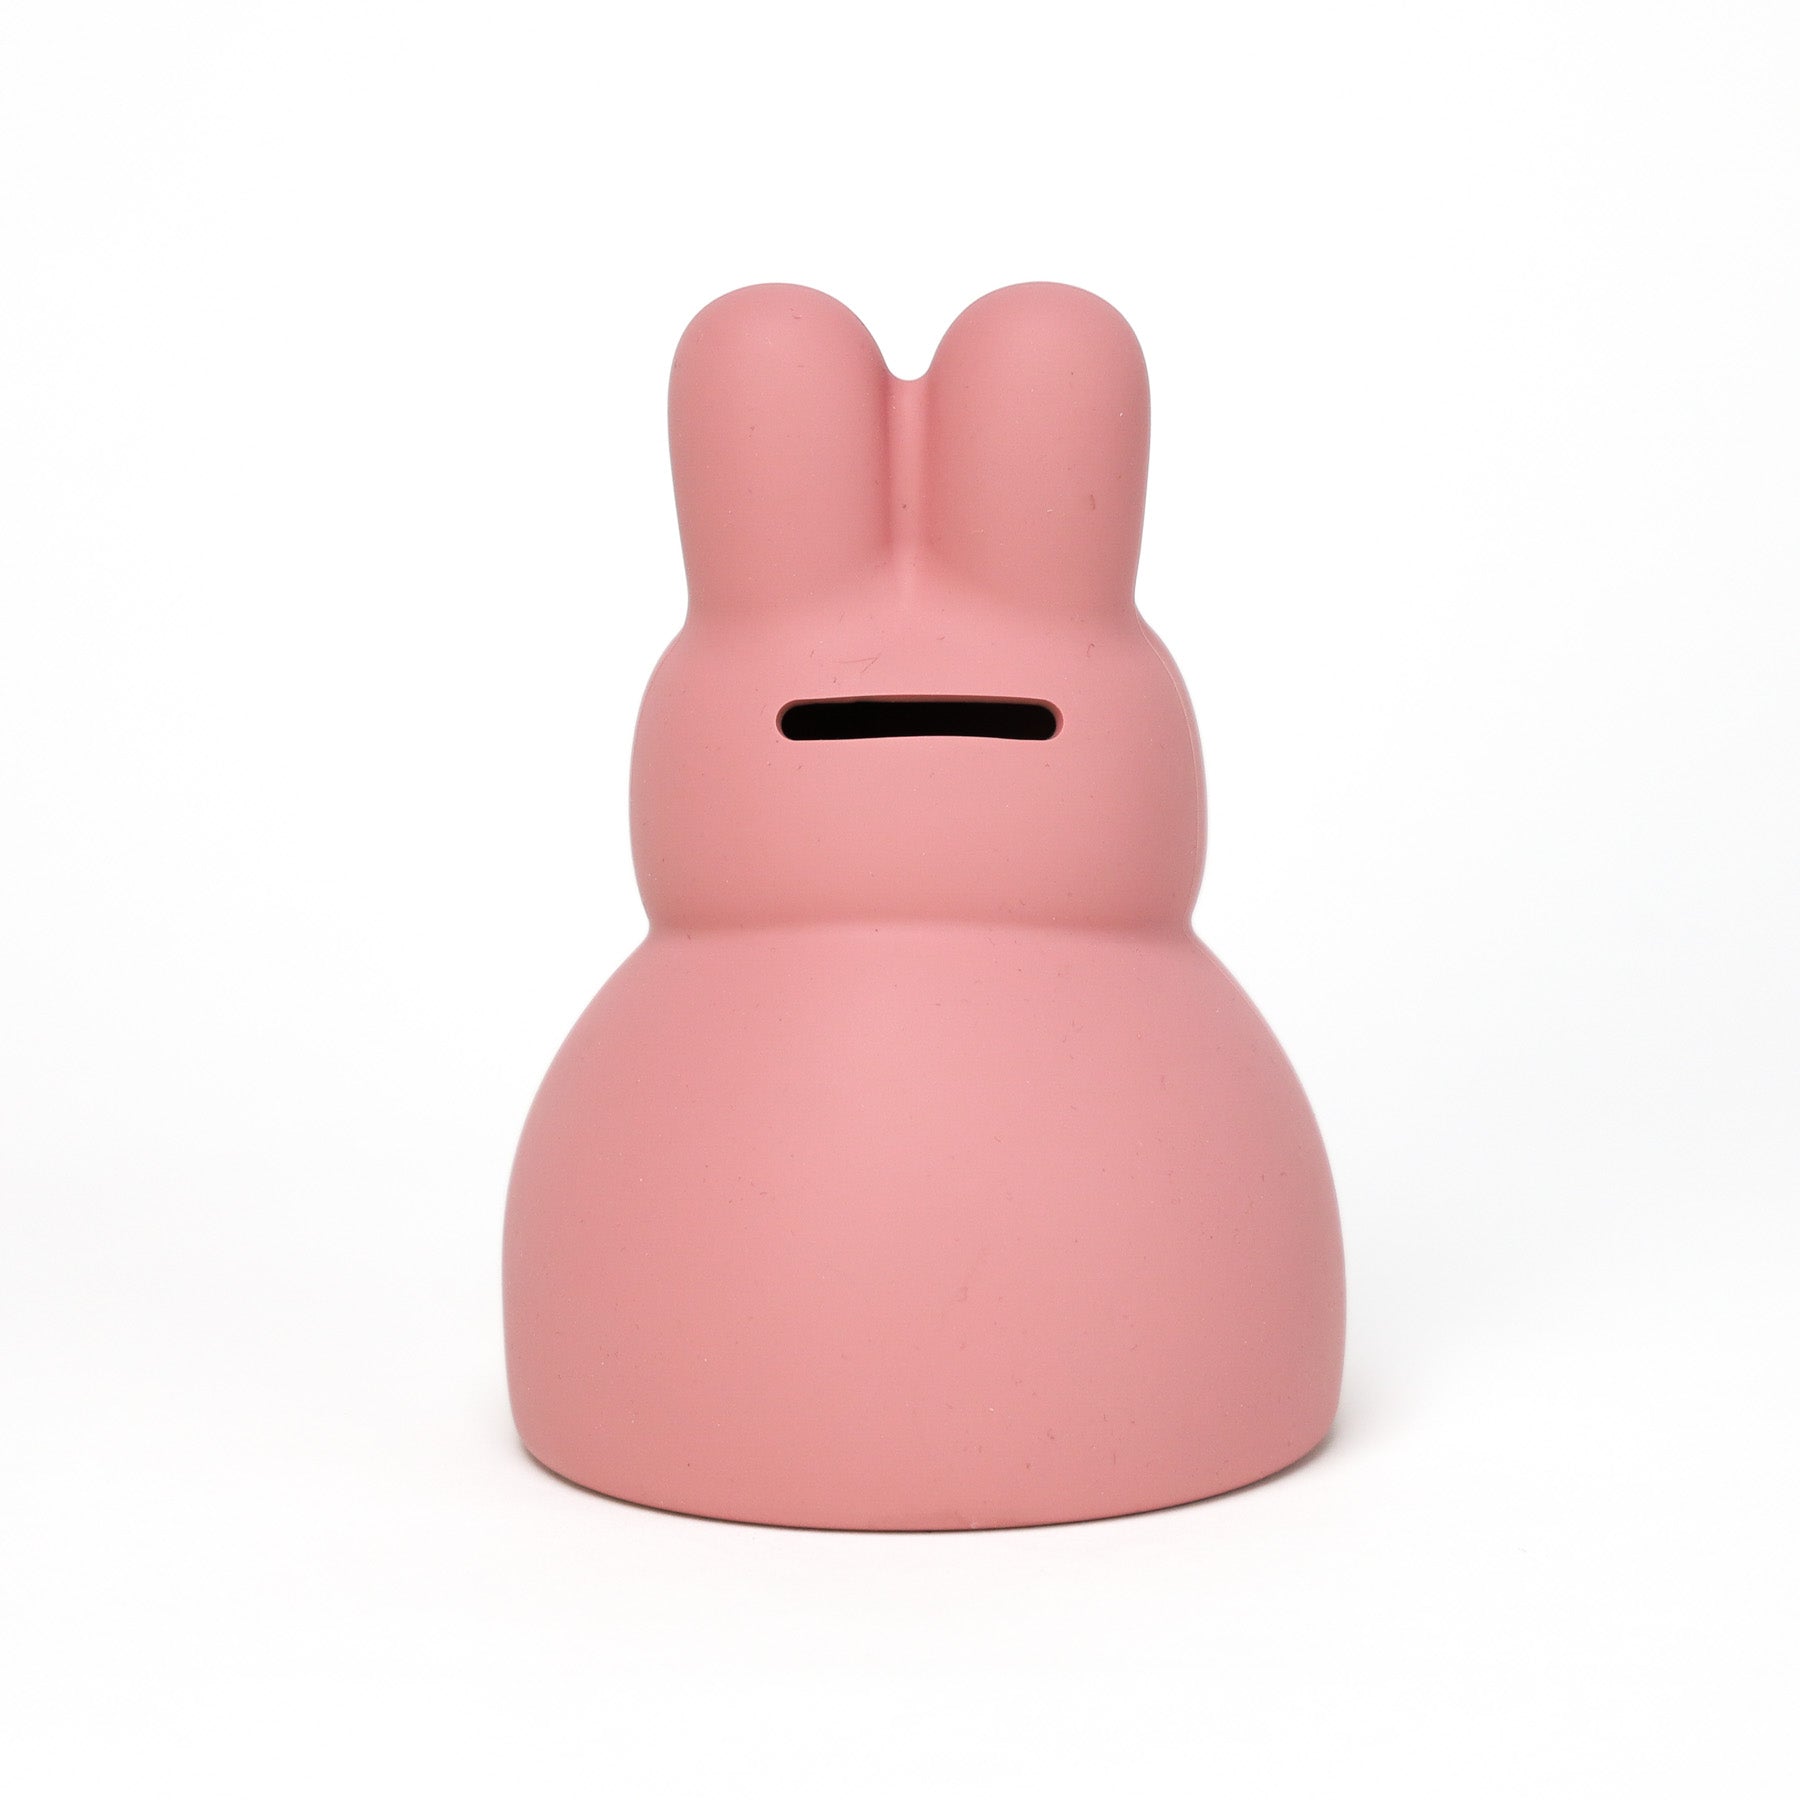 Silicone Piggy Bank Bunny PInk